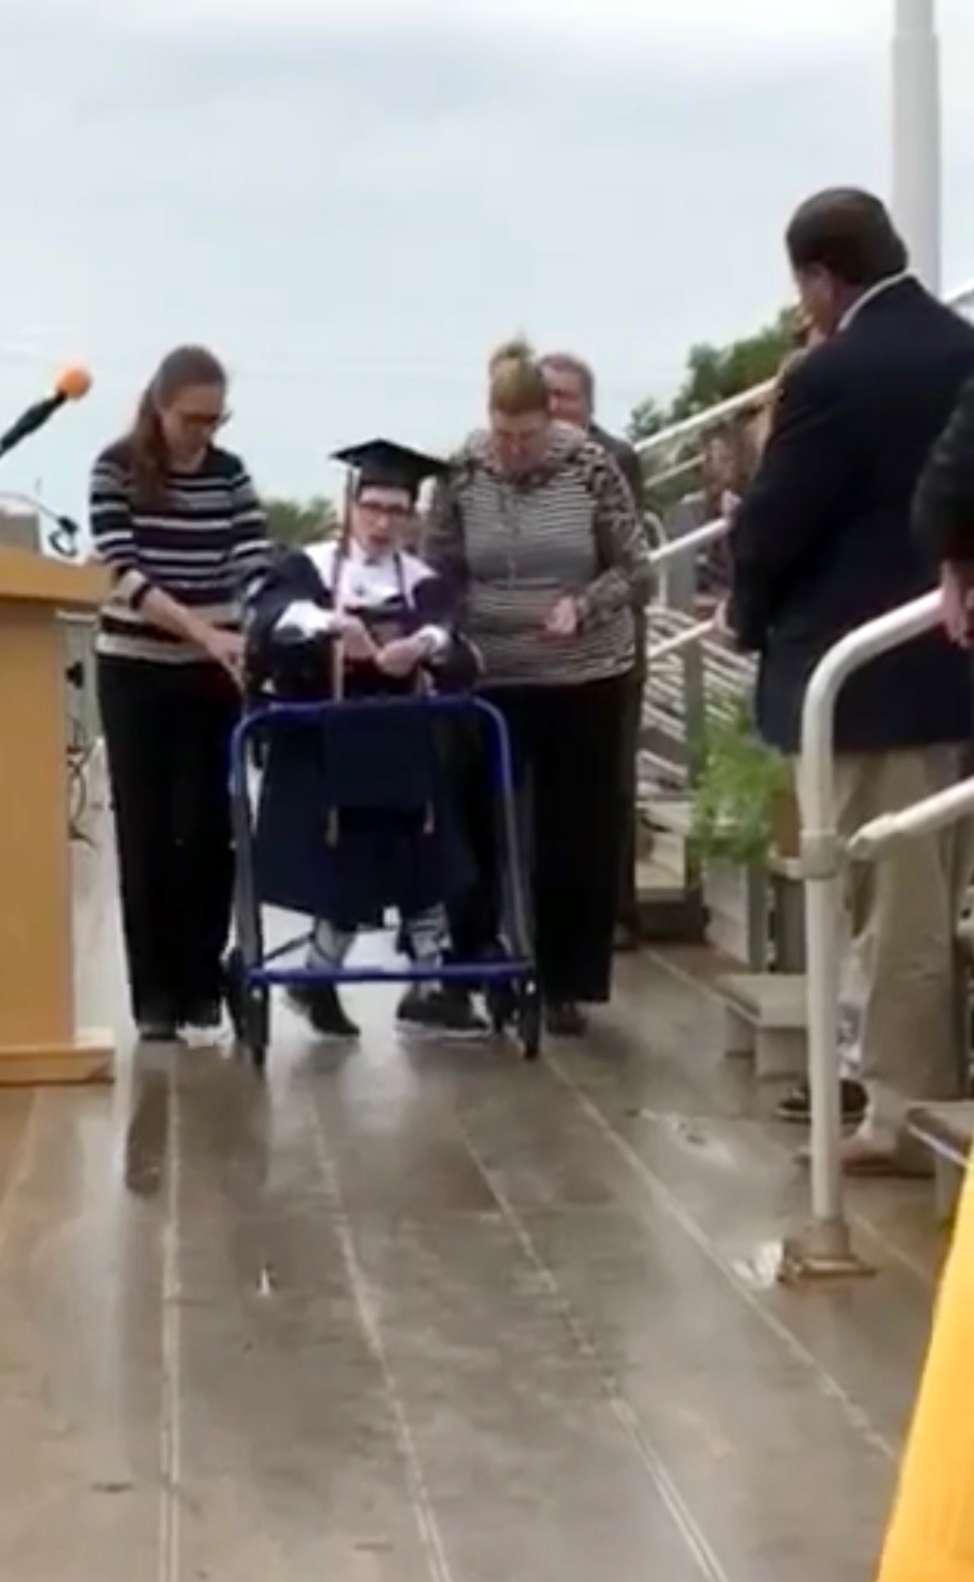 PHOTO: Hunter Wittrock surprised his friends and family when he walked across the stage at Kingfisher High School's 2020 graduation ceremony in Kingfisher, Okla., May 16, 2020.